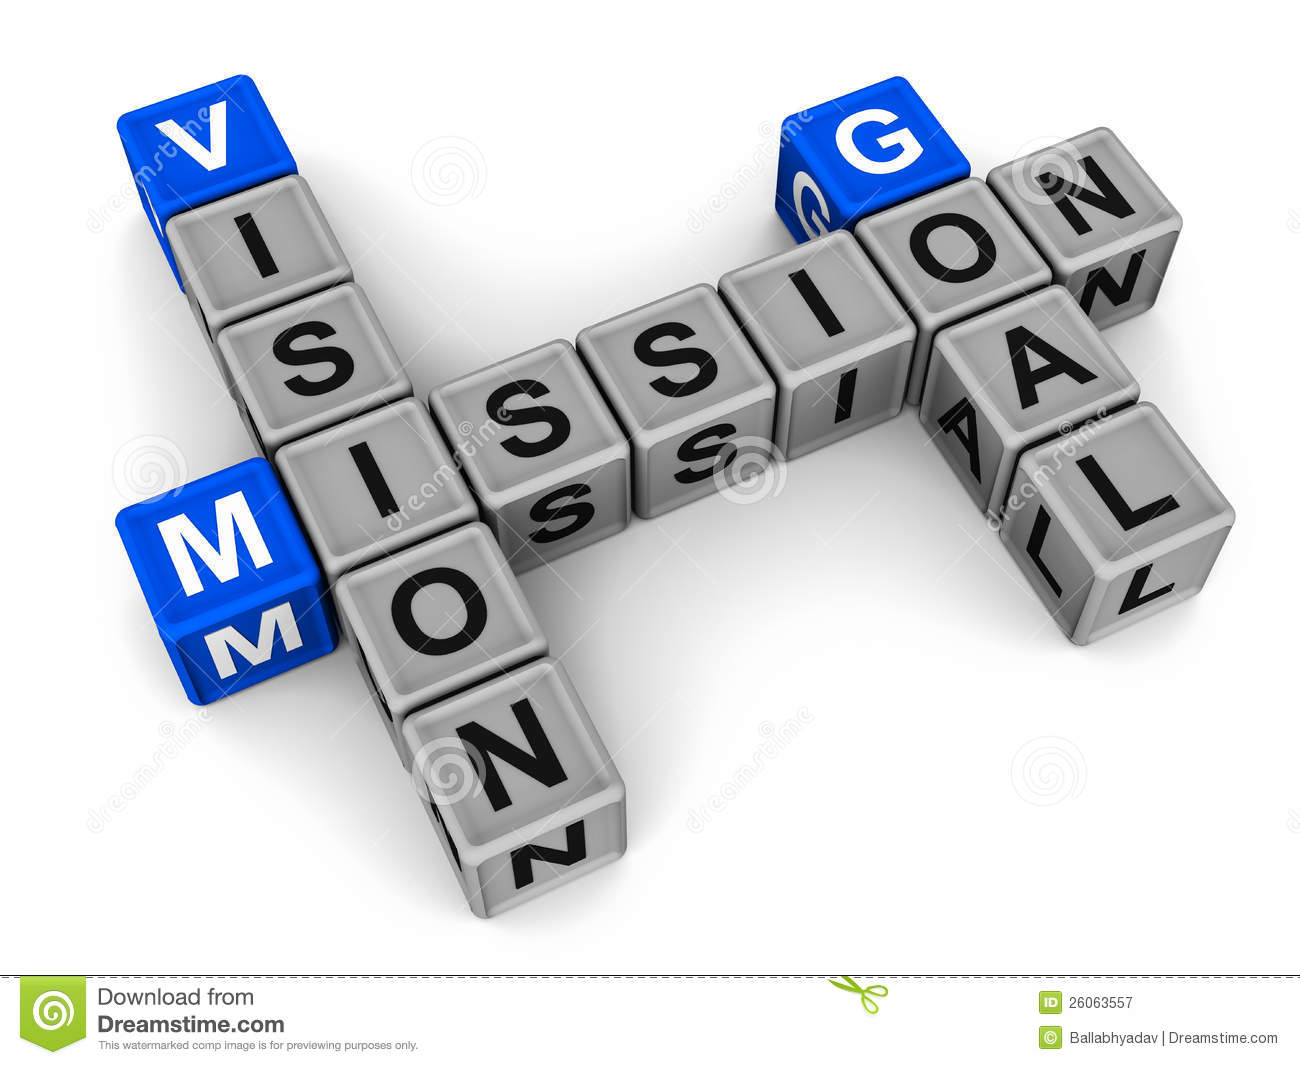 Crossword With Vision Mission Goal Words In Arrangement On White